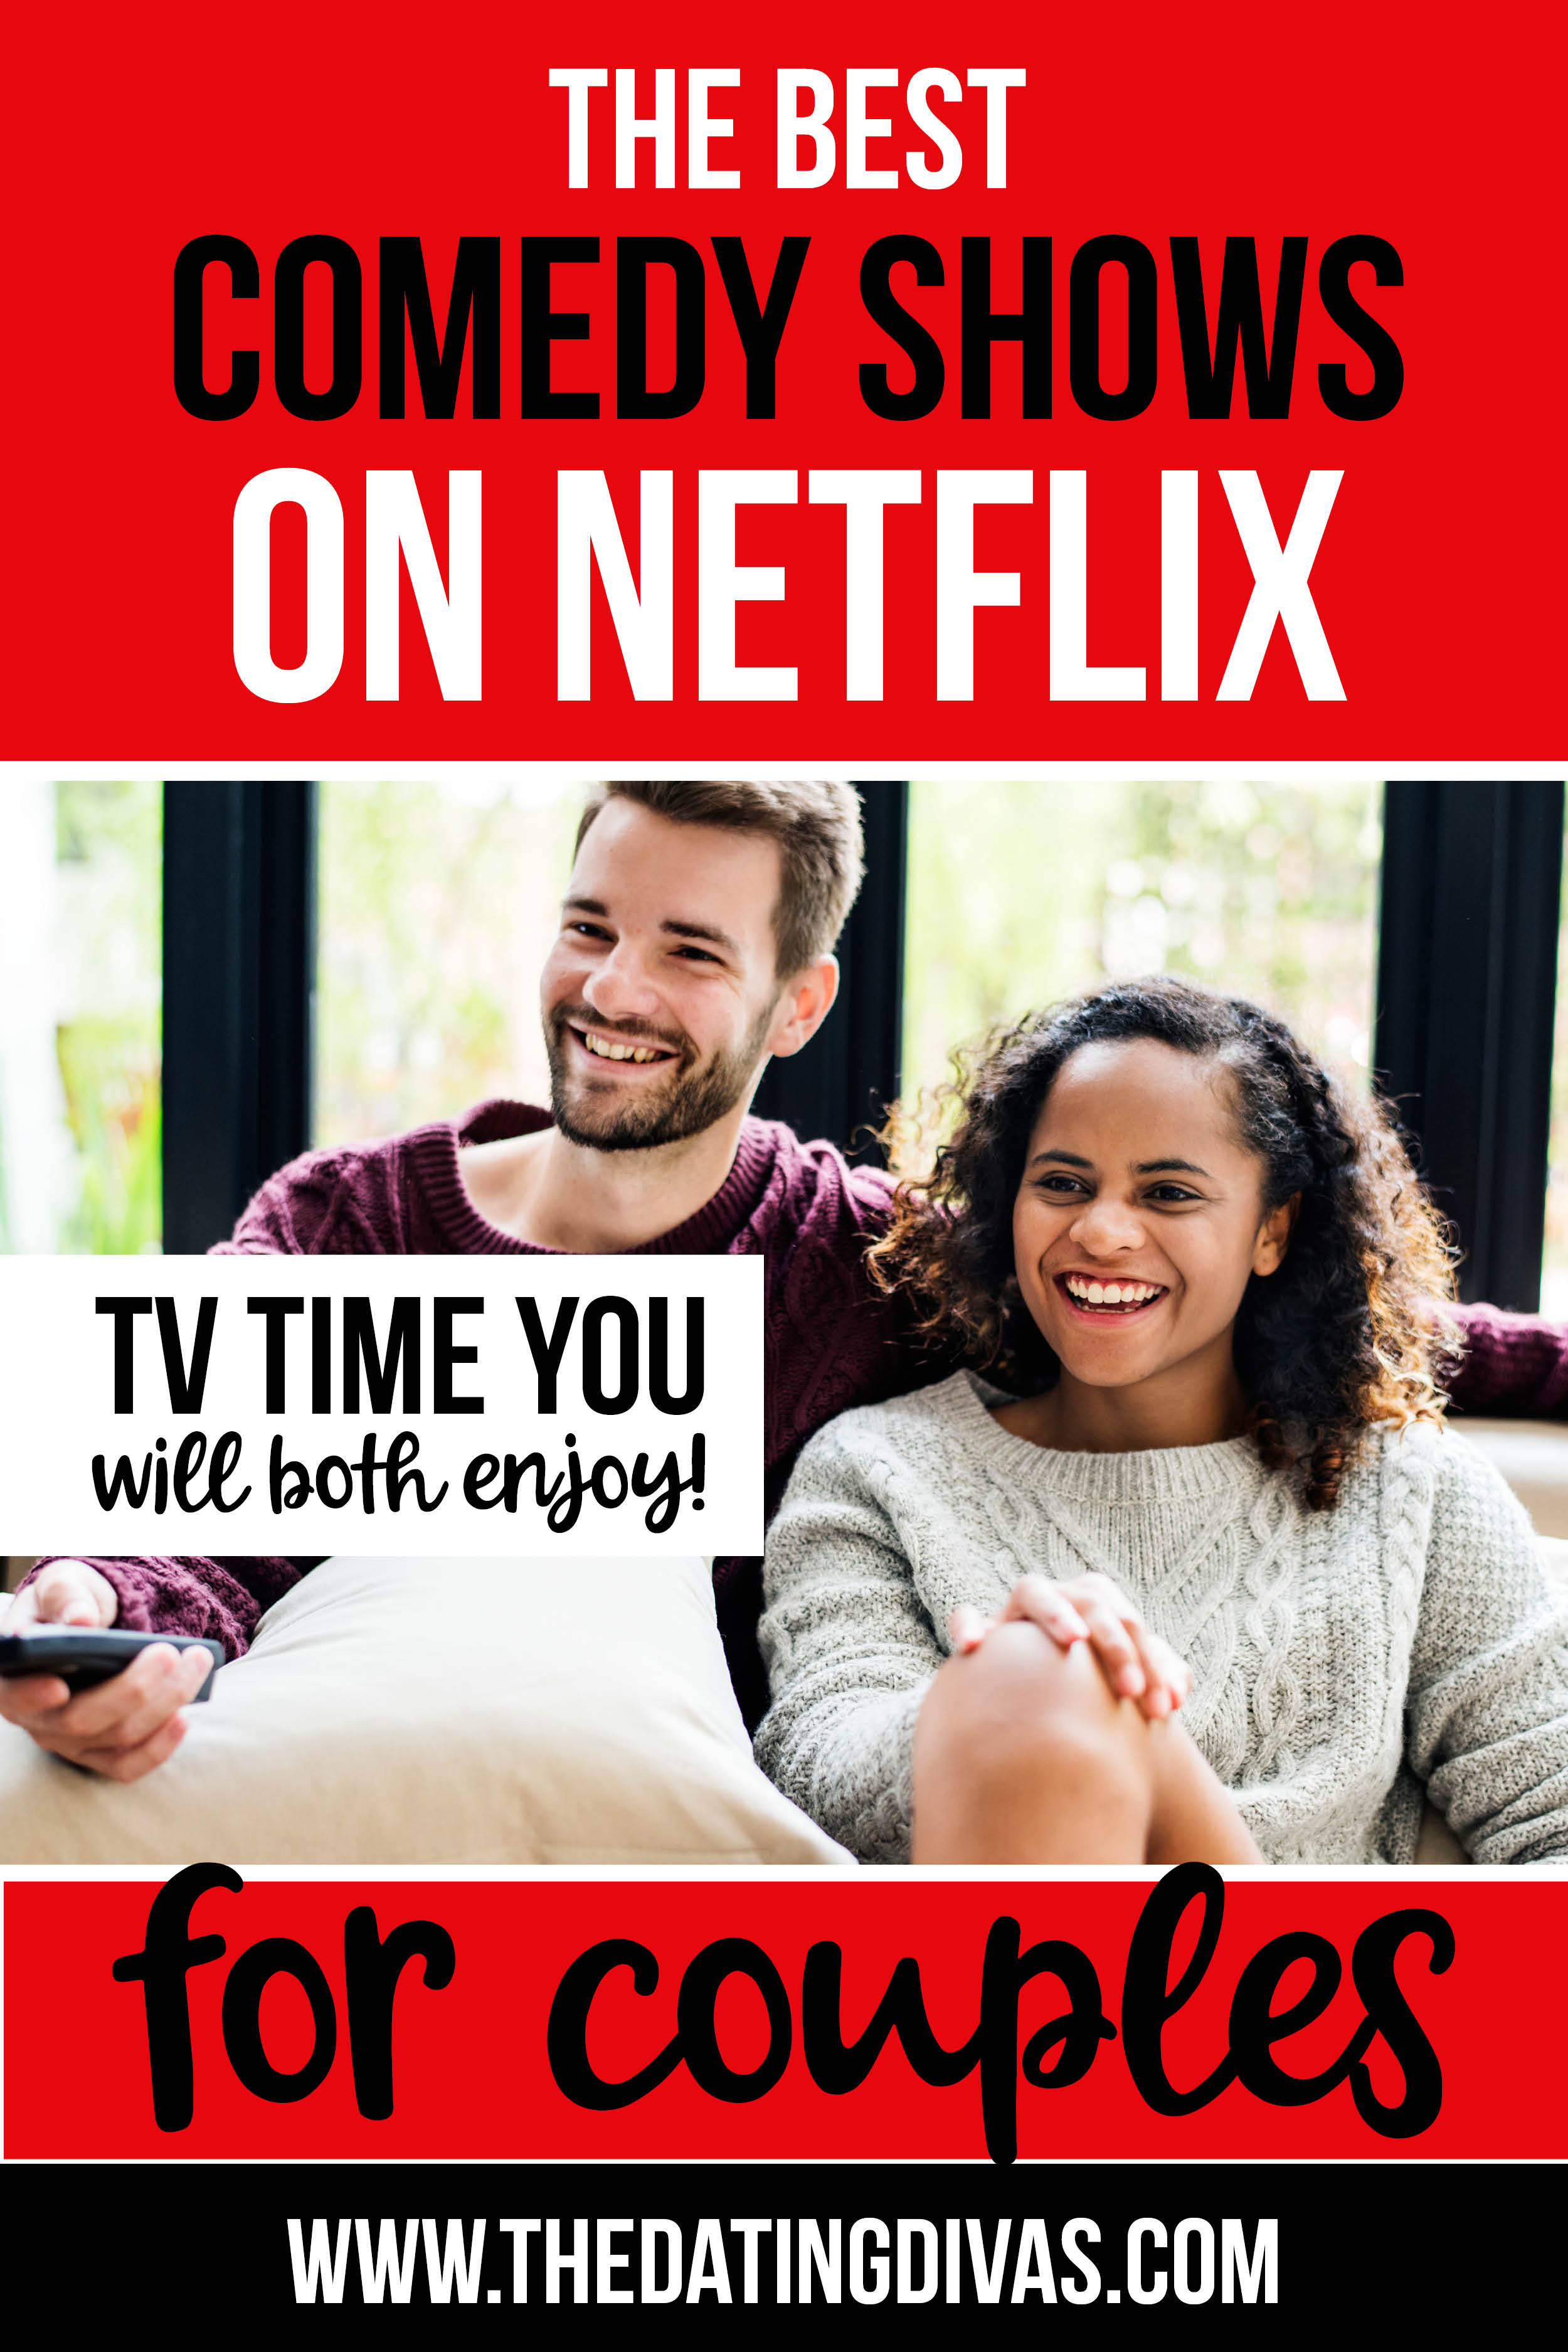 The very best comedy shows on Netflix - all in one place! This post has some great suggestions for comedy shows on Netflix that you both will love. Check these out! Perfect for your next Netflix binge! #netflixcomedy #tvcomedy #netflixshows